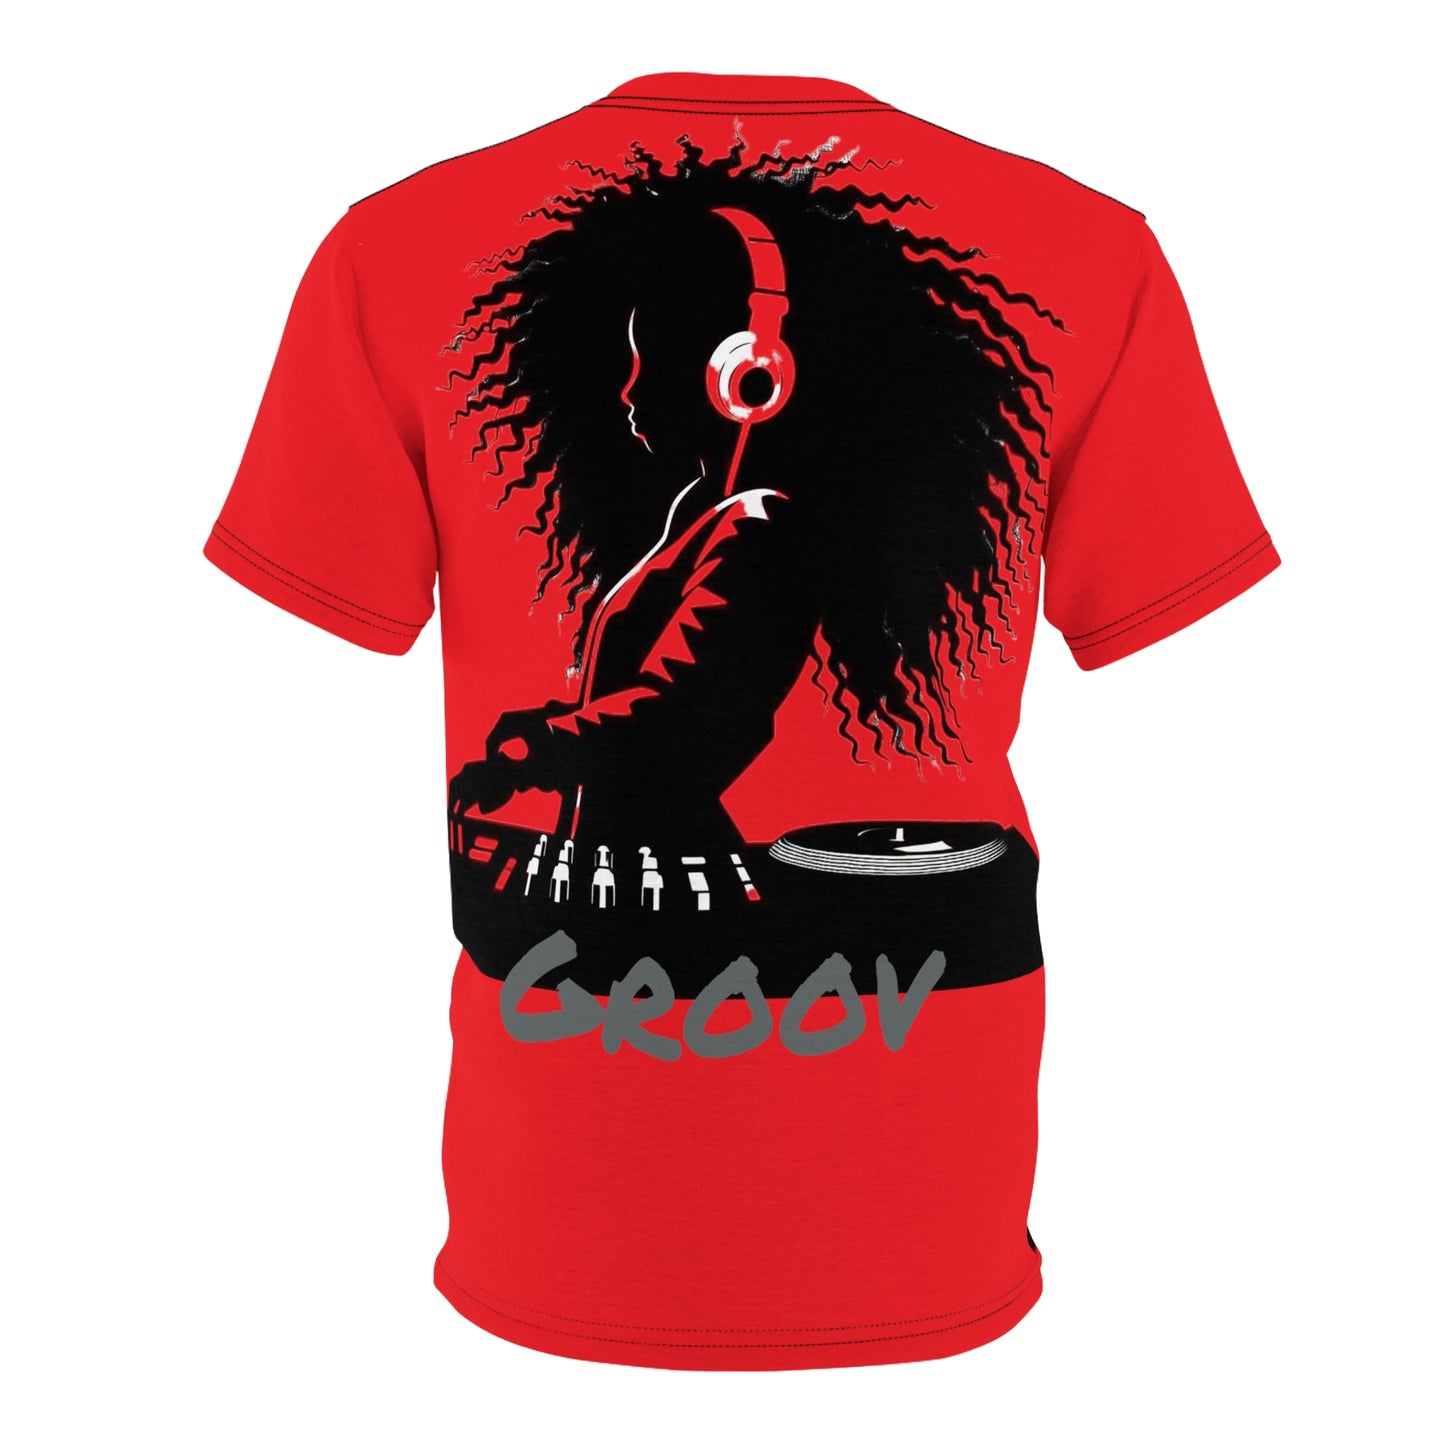 Smoov Groov in Red - Front/Back Unisex Cut & Sew Tee (AOP)